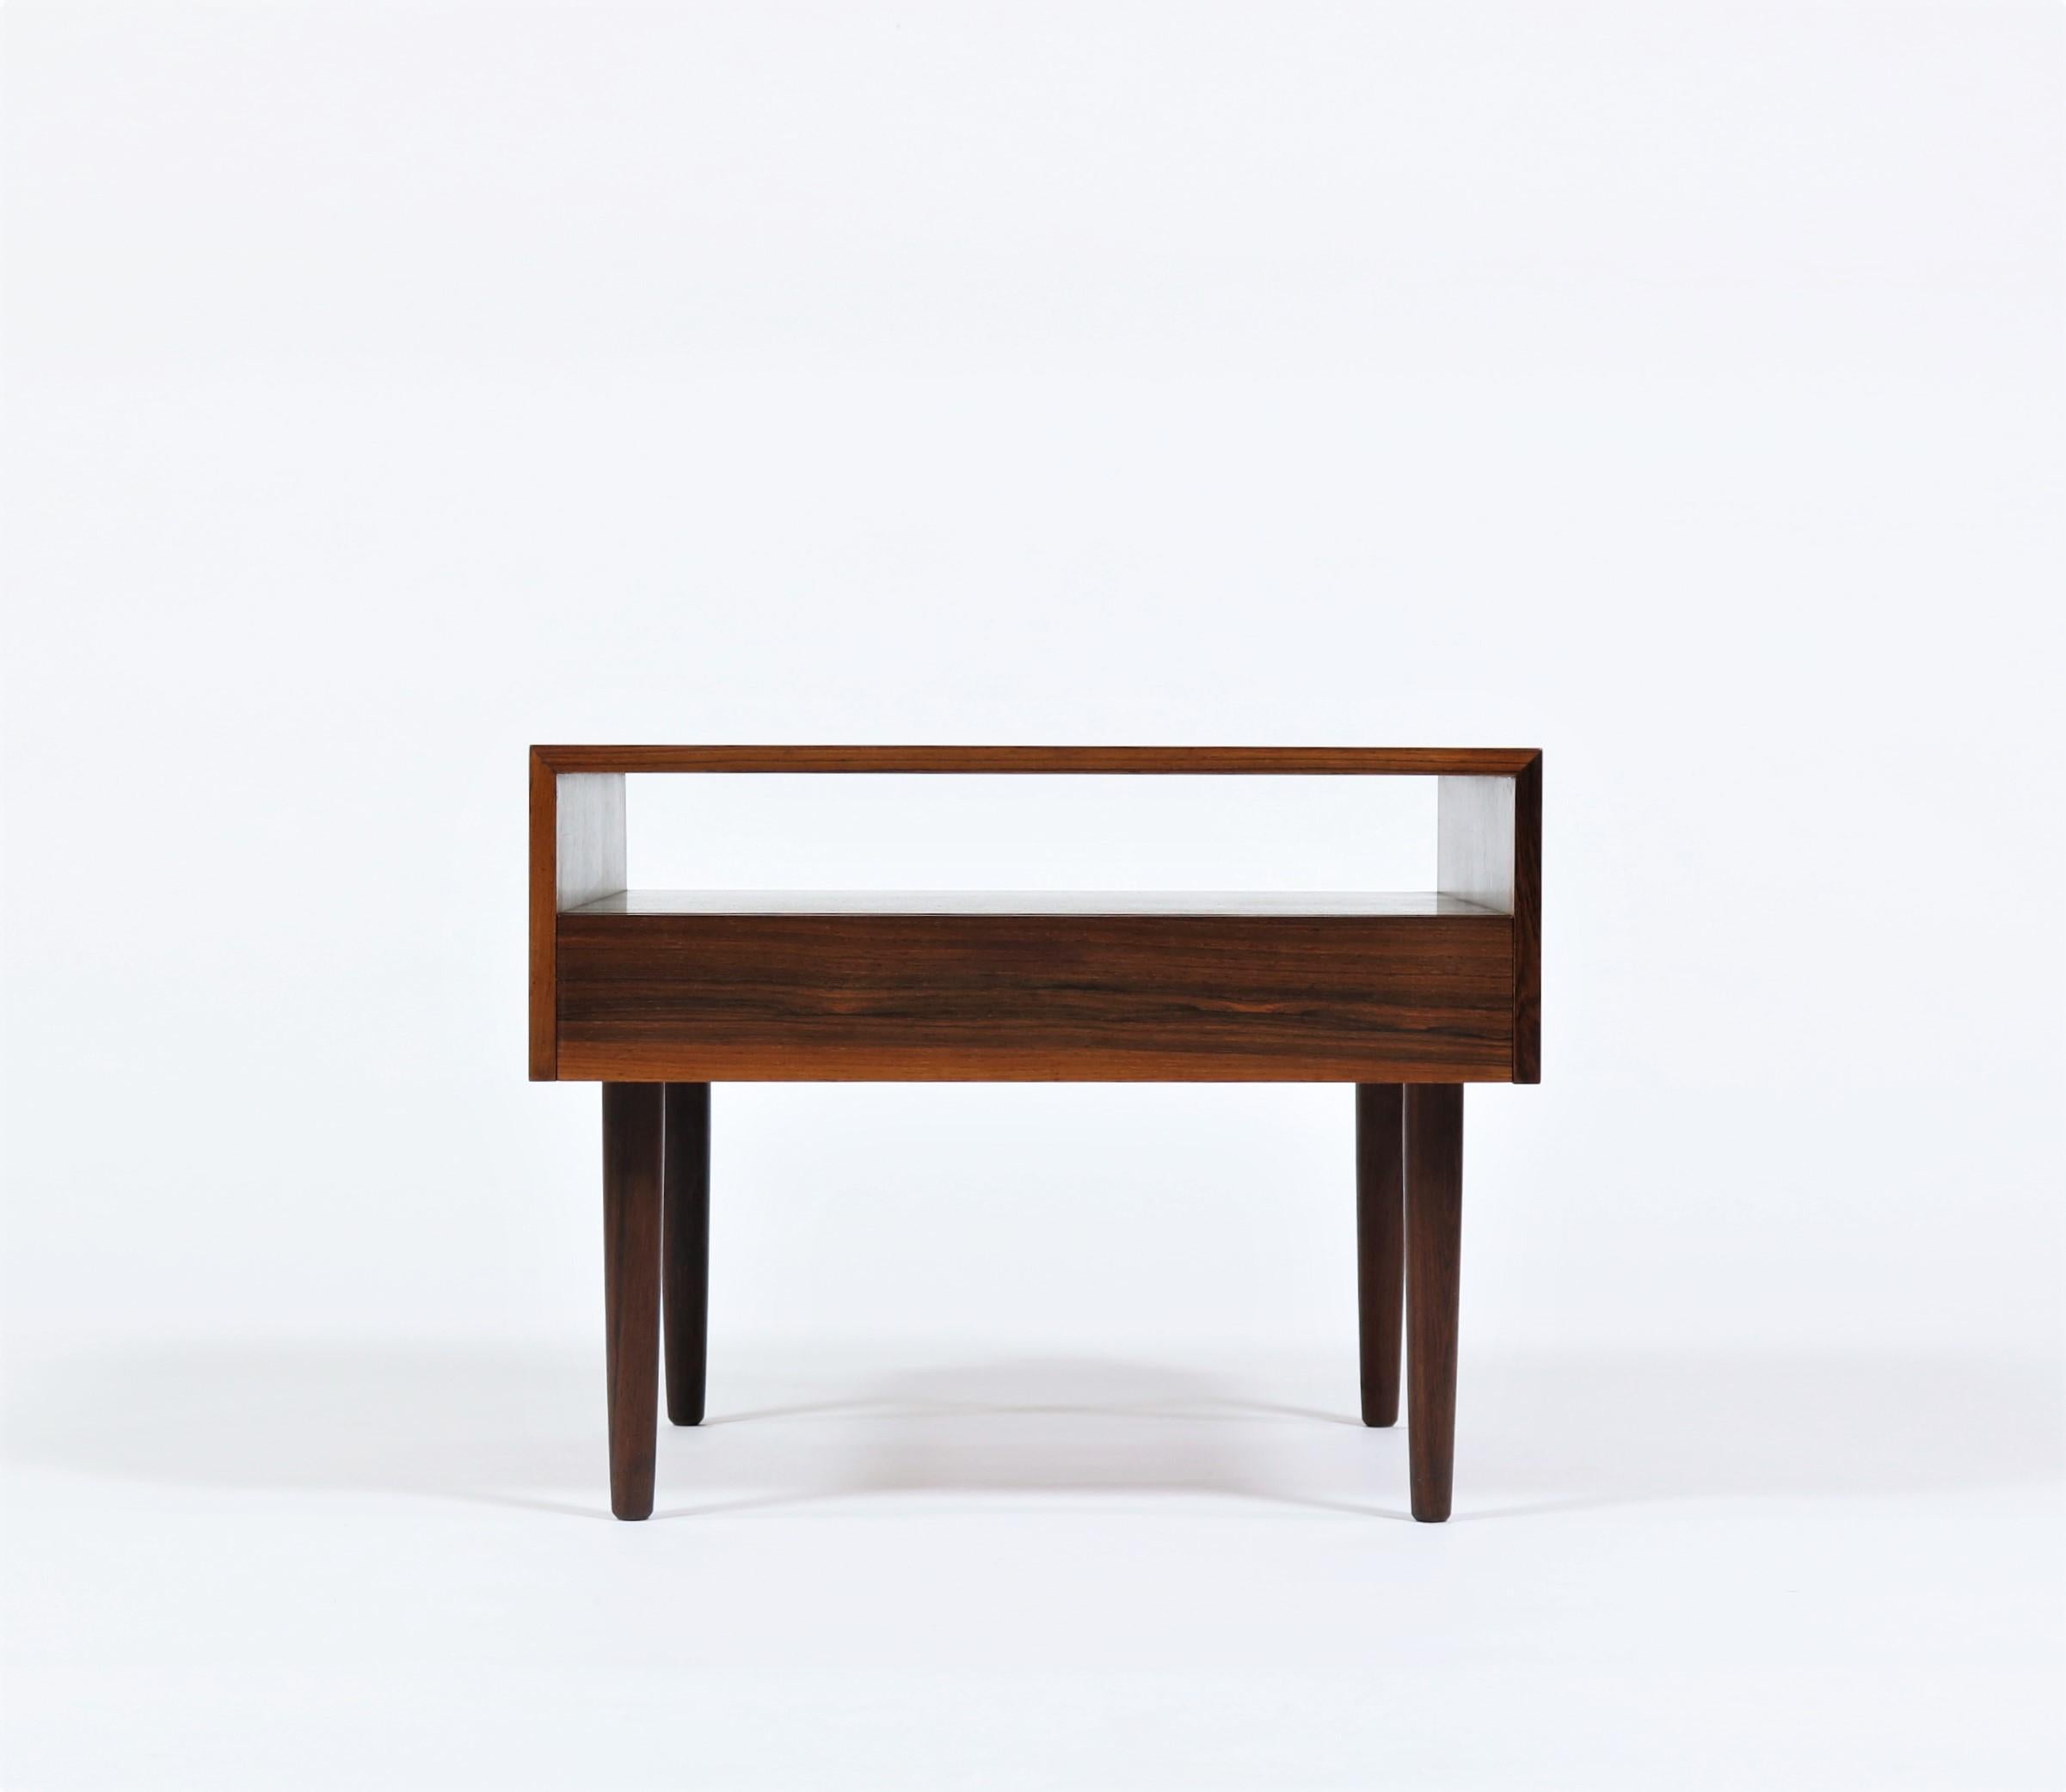 Cool and elegant side/end table made in Denmark in the 1960s in beautifully grained Rosewood. The style is typical for Danish Modern furniture of the era and designers such as Kai Kristiansen, Arne Vodder or Aksel Kjersgaard.